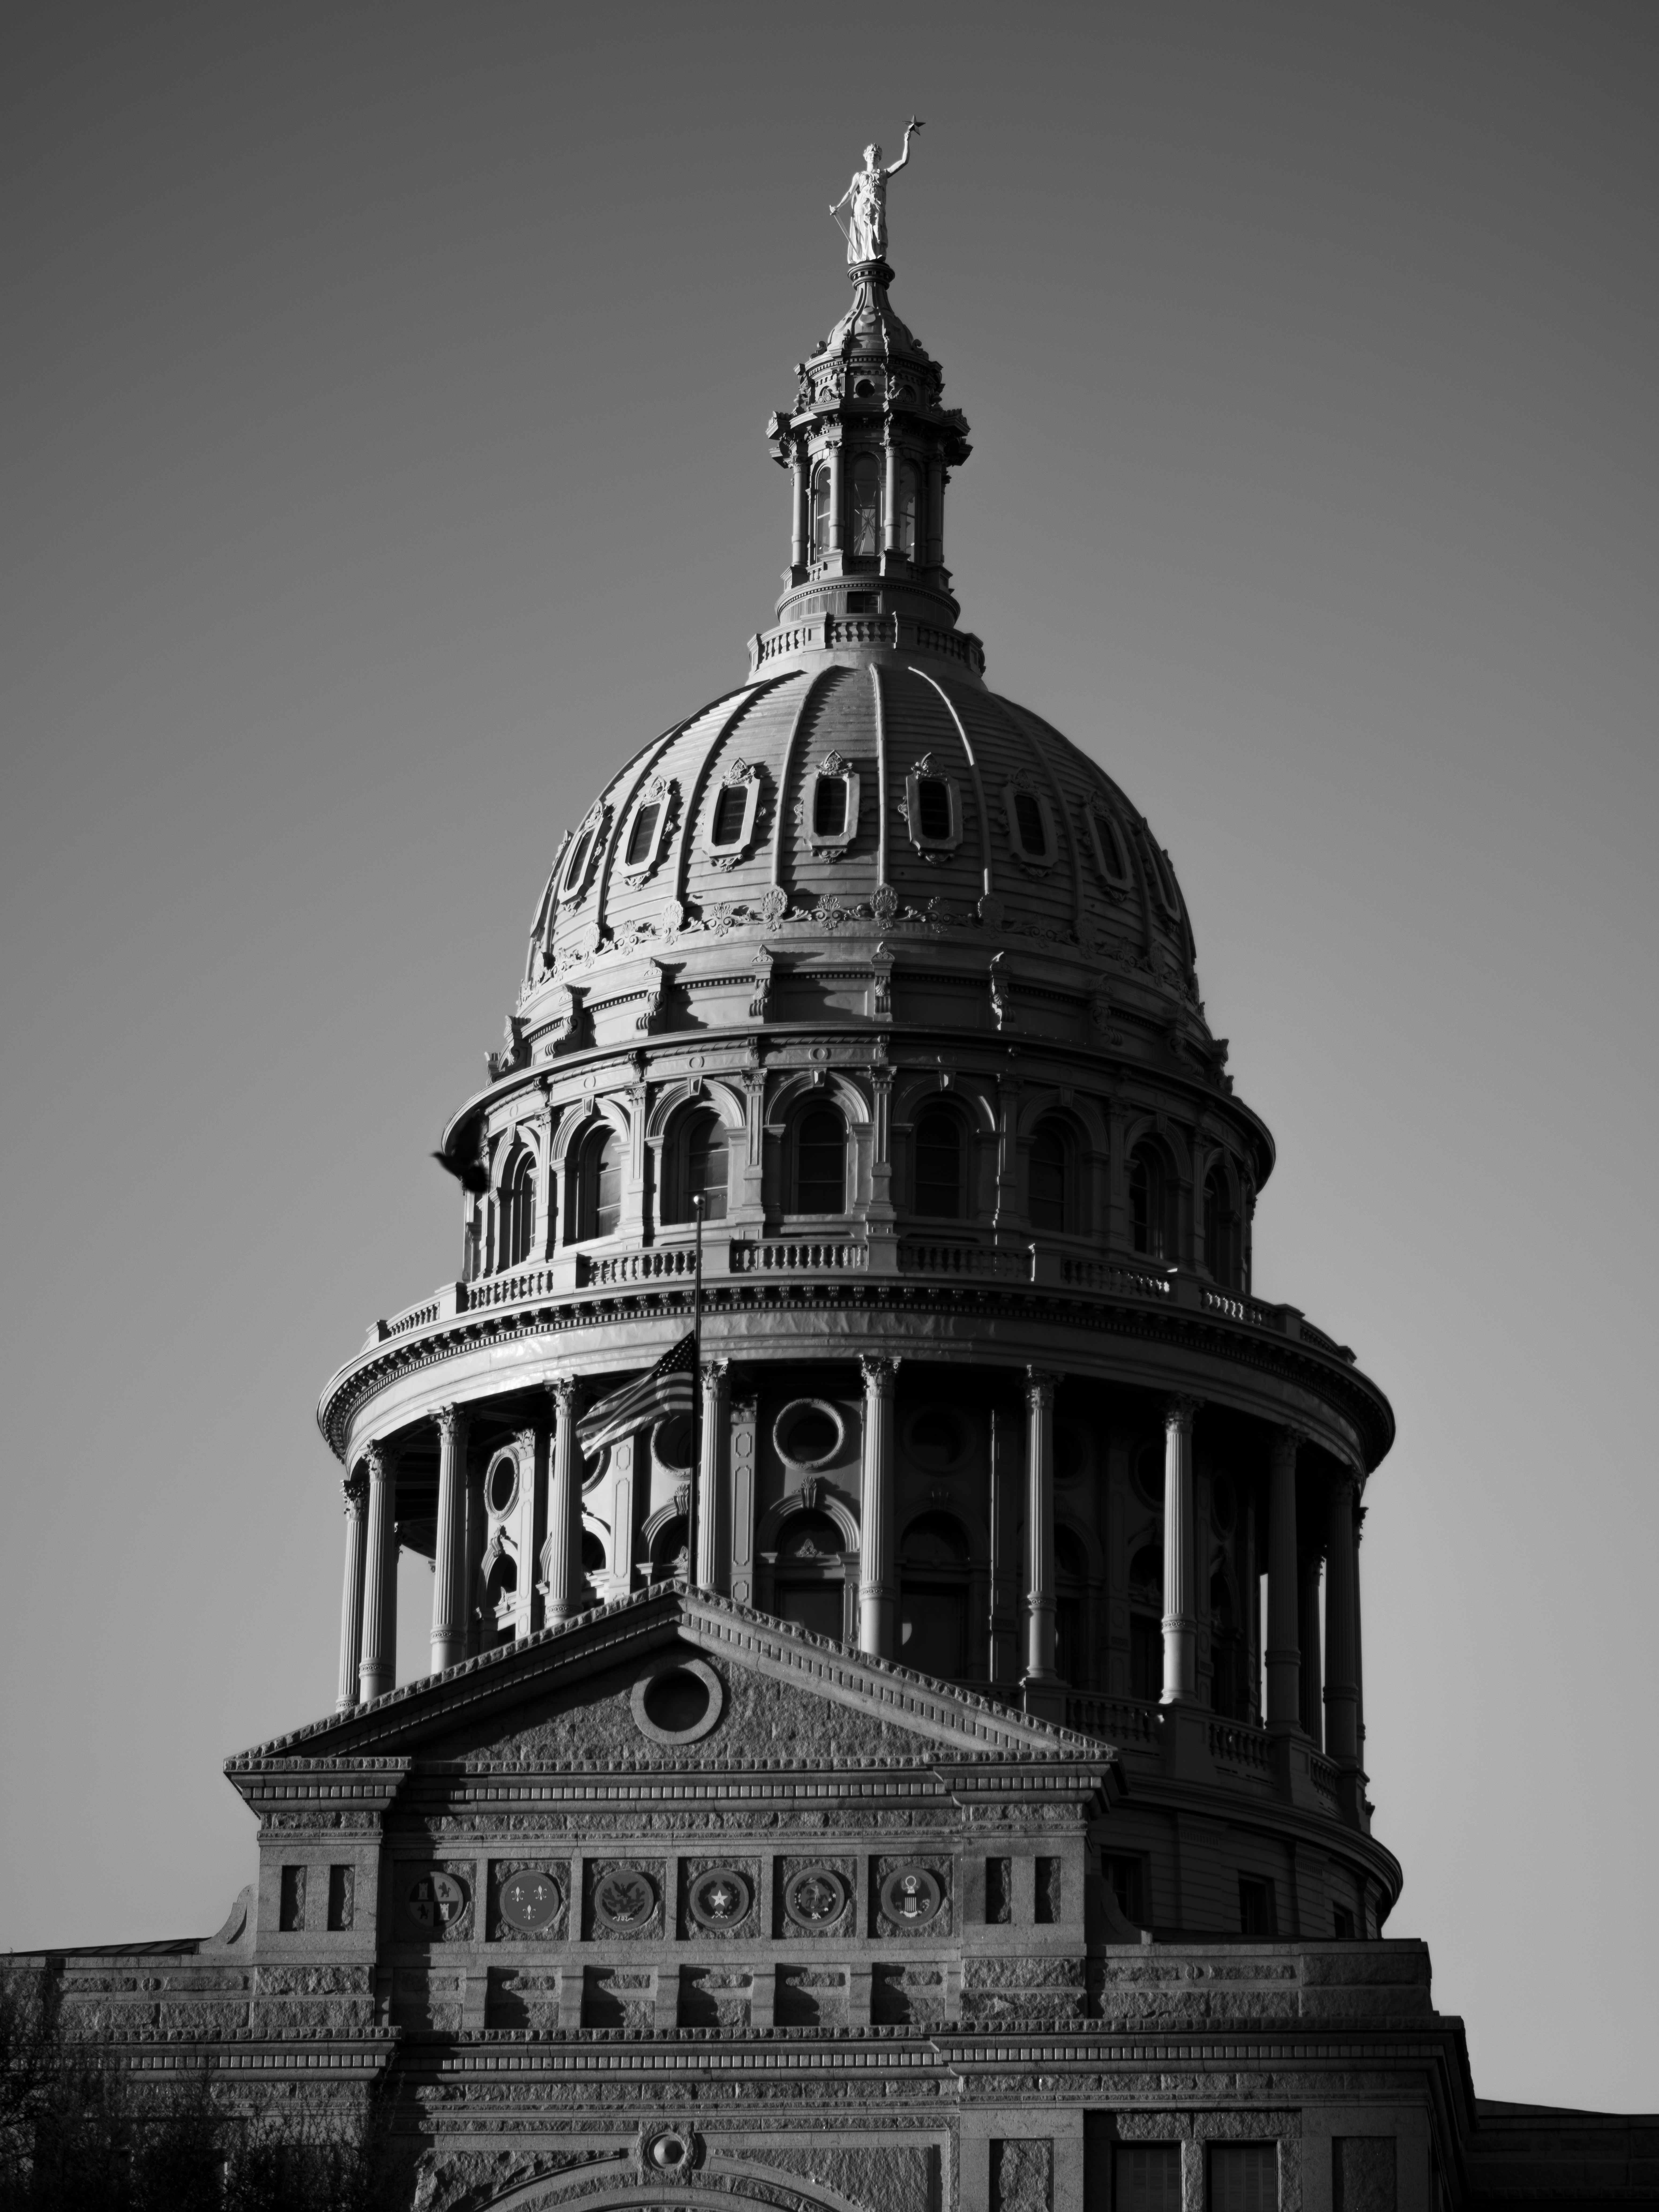 The dome of the Texas State Capitol, in black and white, with a gradient filter creating a gloomy aura about it.